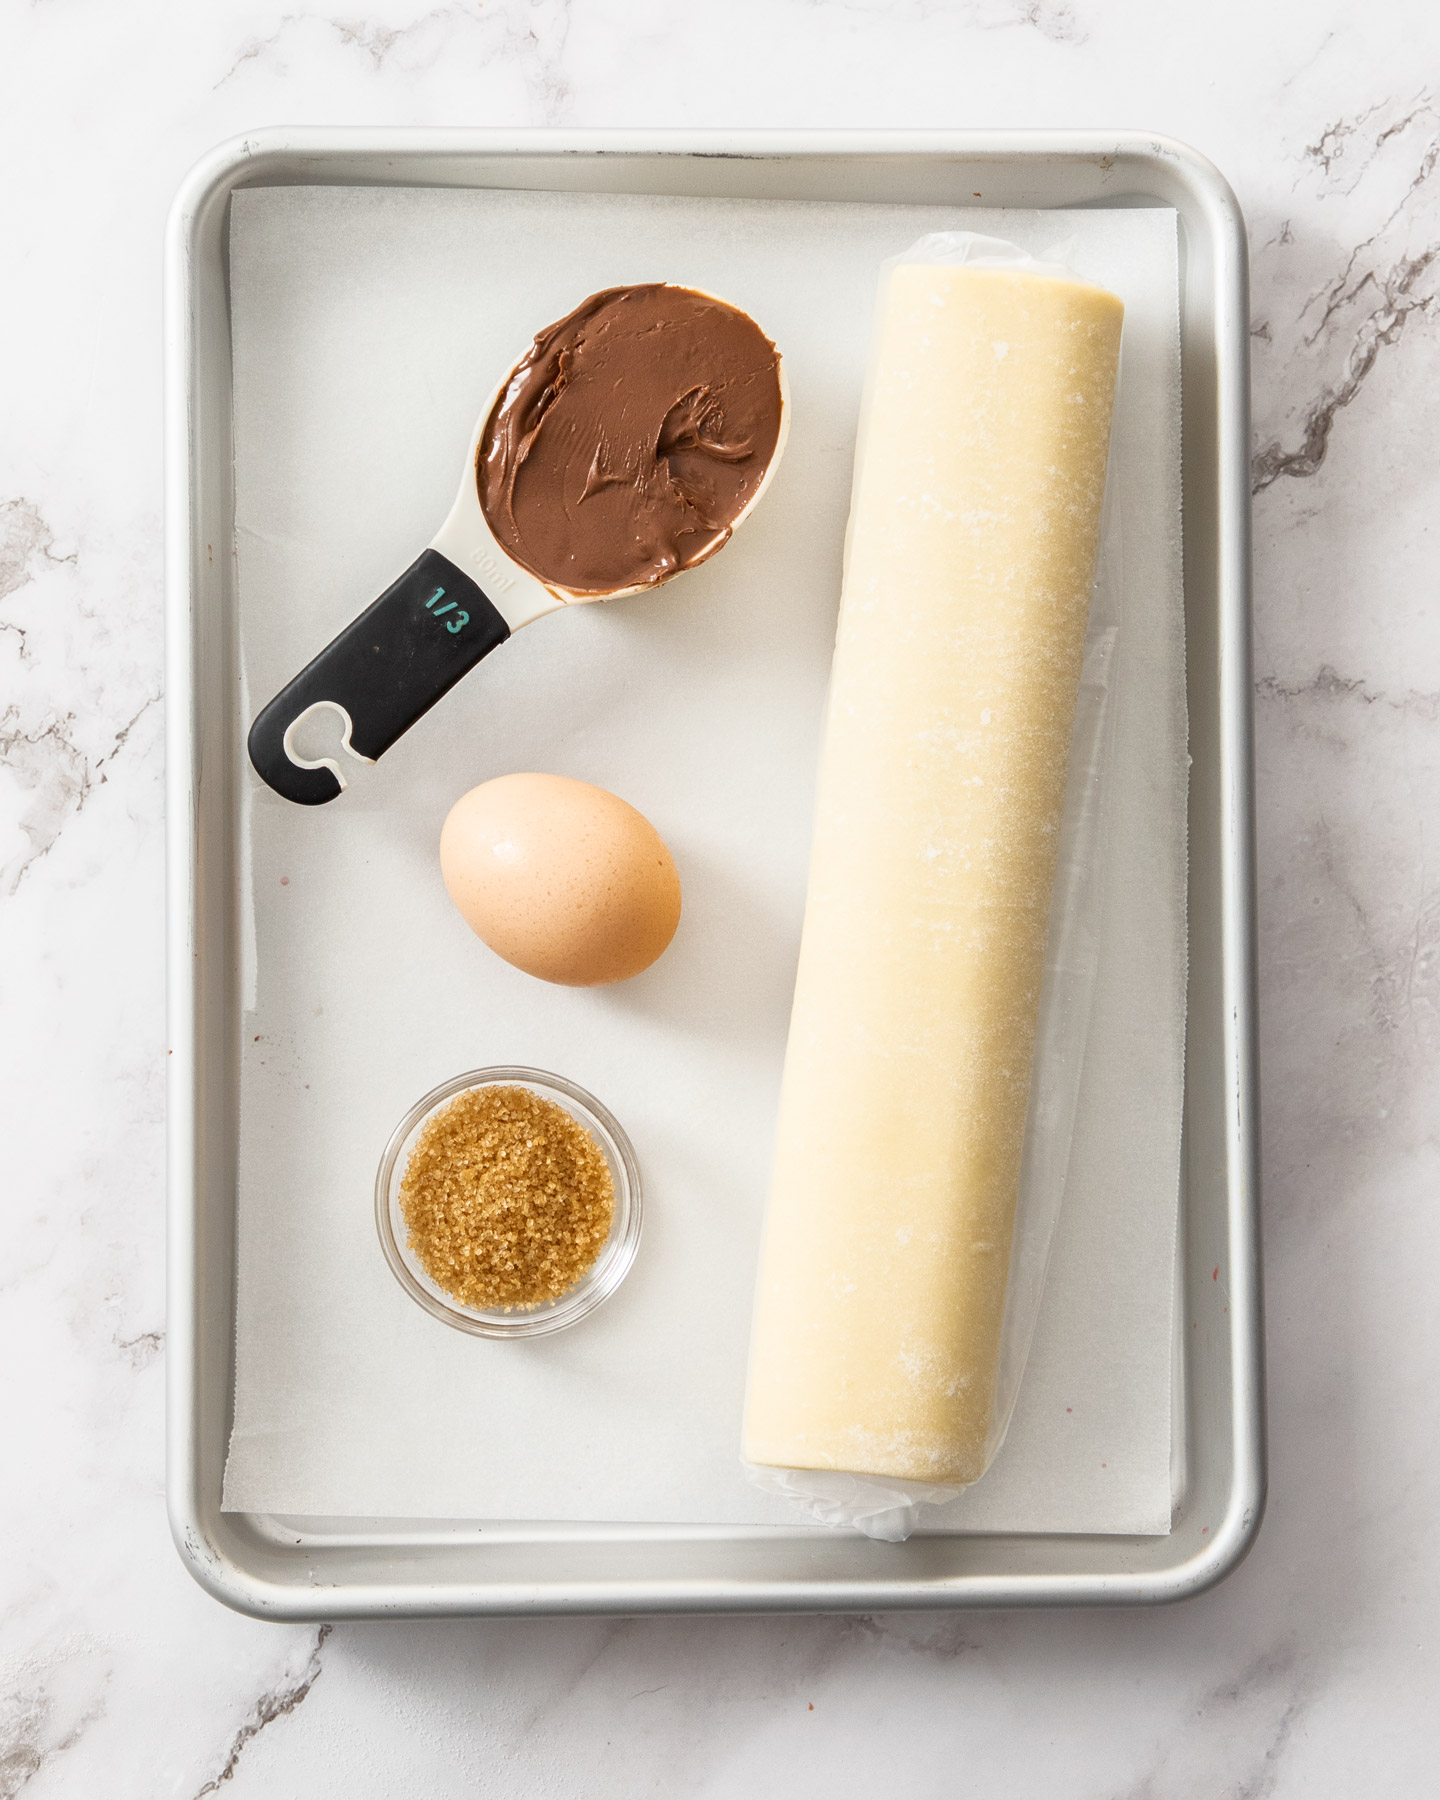 Ingredients for Nutella puff pastry twists on a baking tray.